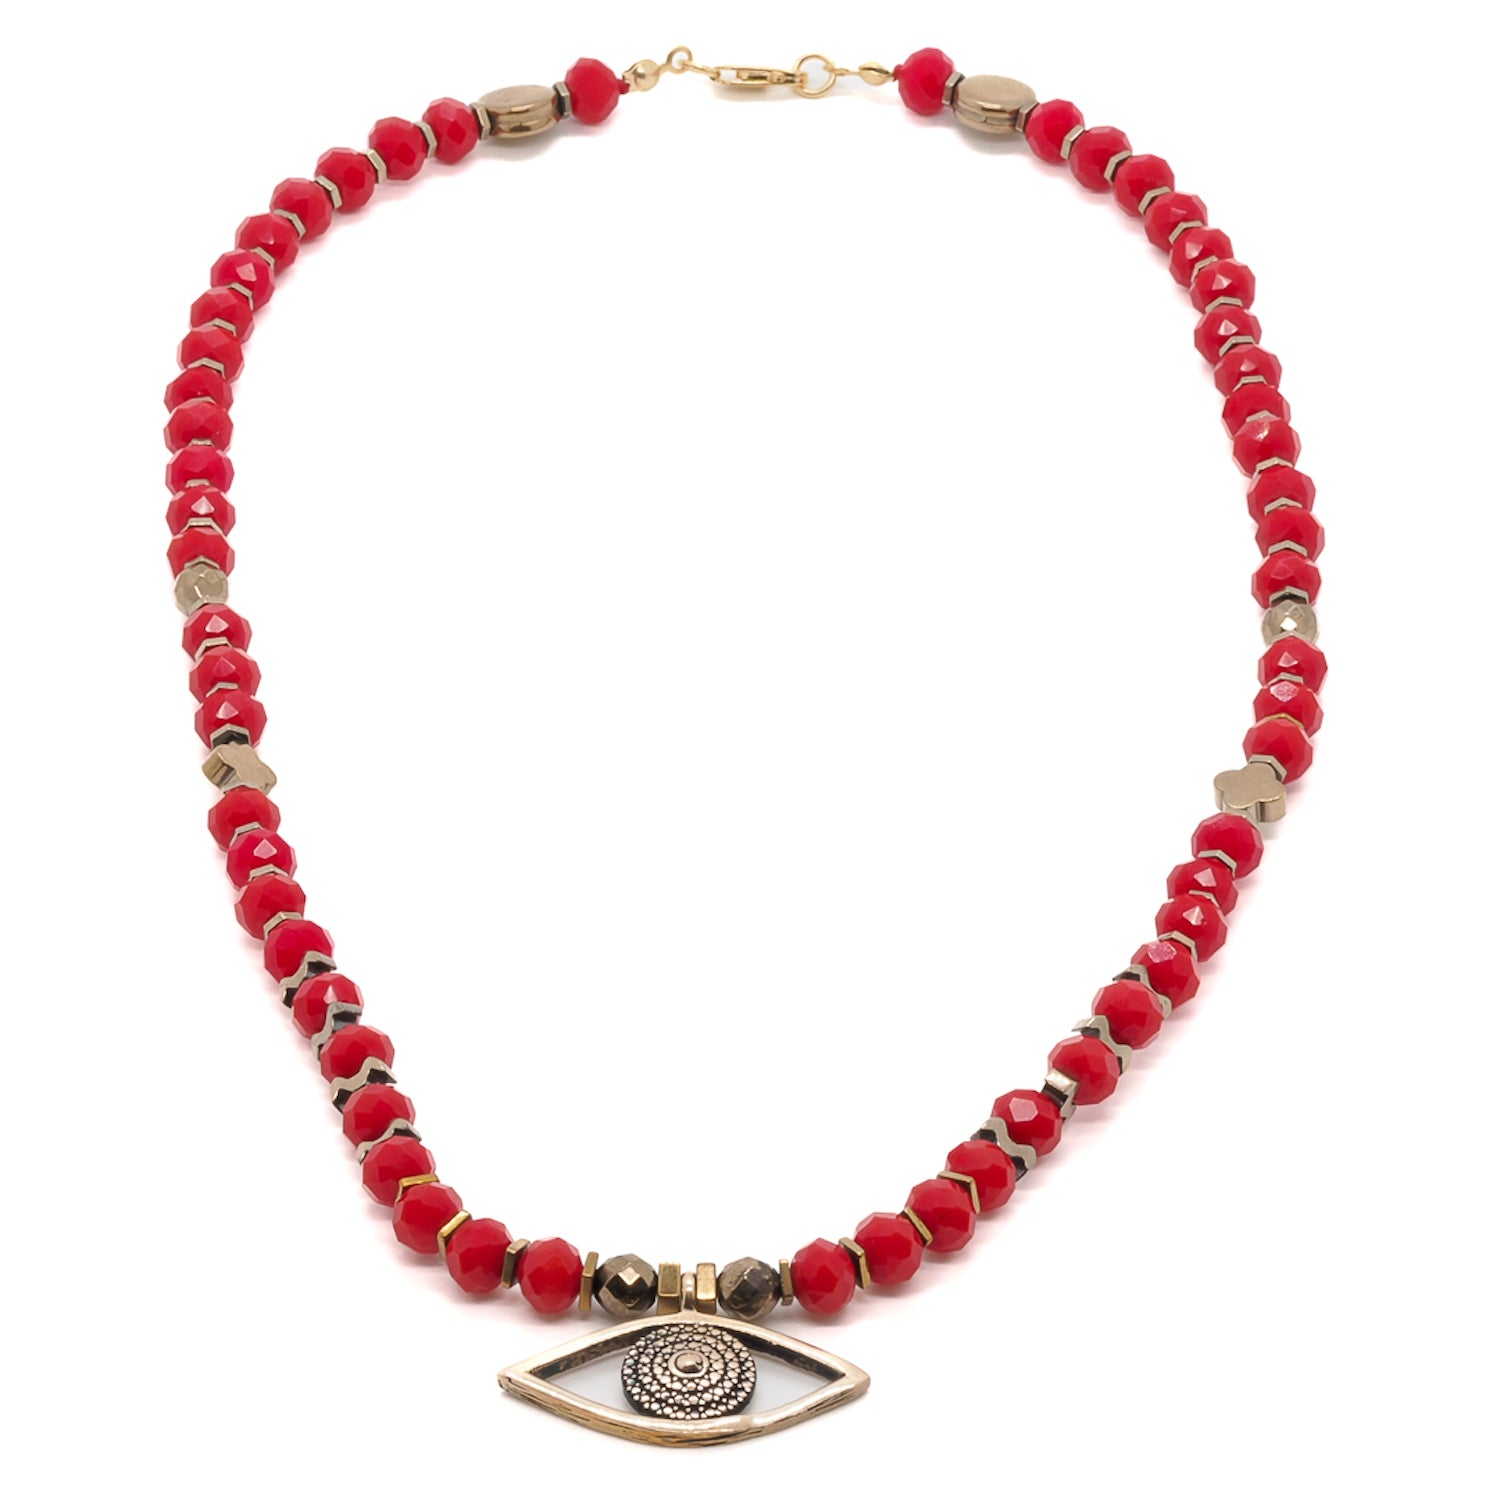 Handcrafted necklace featuring a powerful Evil Eye pendant and red crystal beads, symbolizing protection and positive energy.